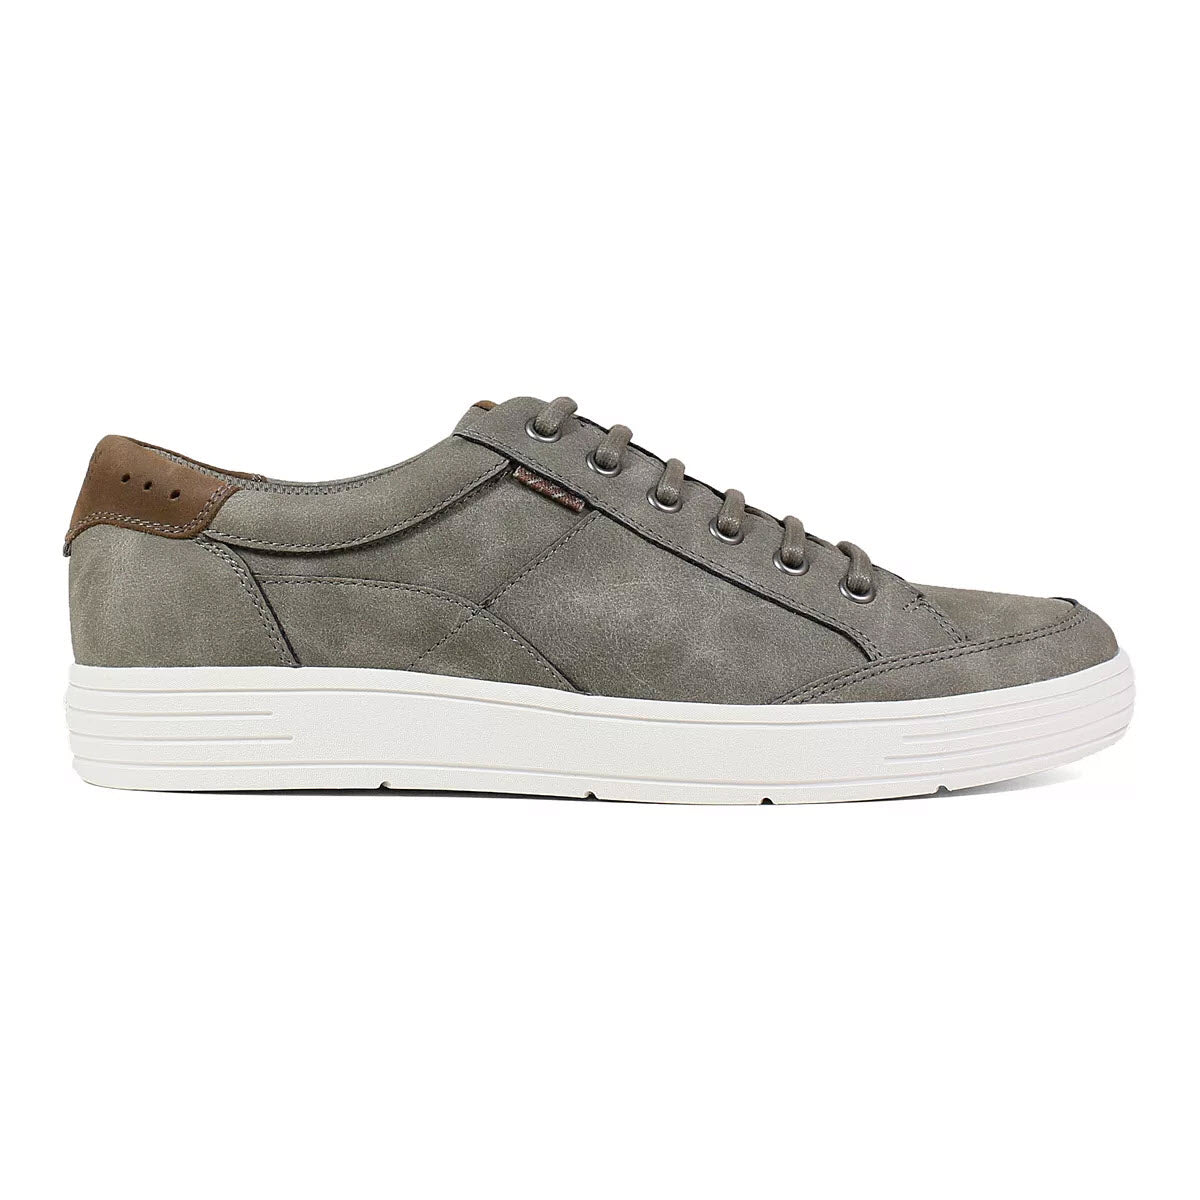 A single Nunn Bush Kore City Walk 2 Gray suede sneaker with white soles, brown leather detailing, and a Comfort Gel footbed.